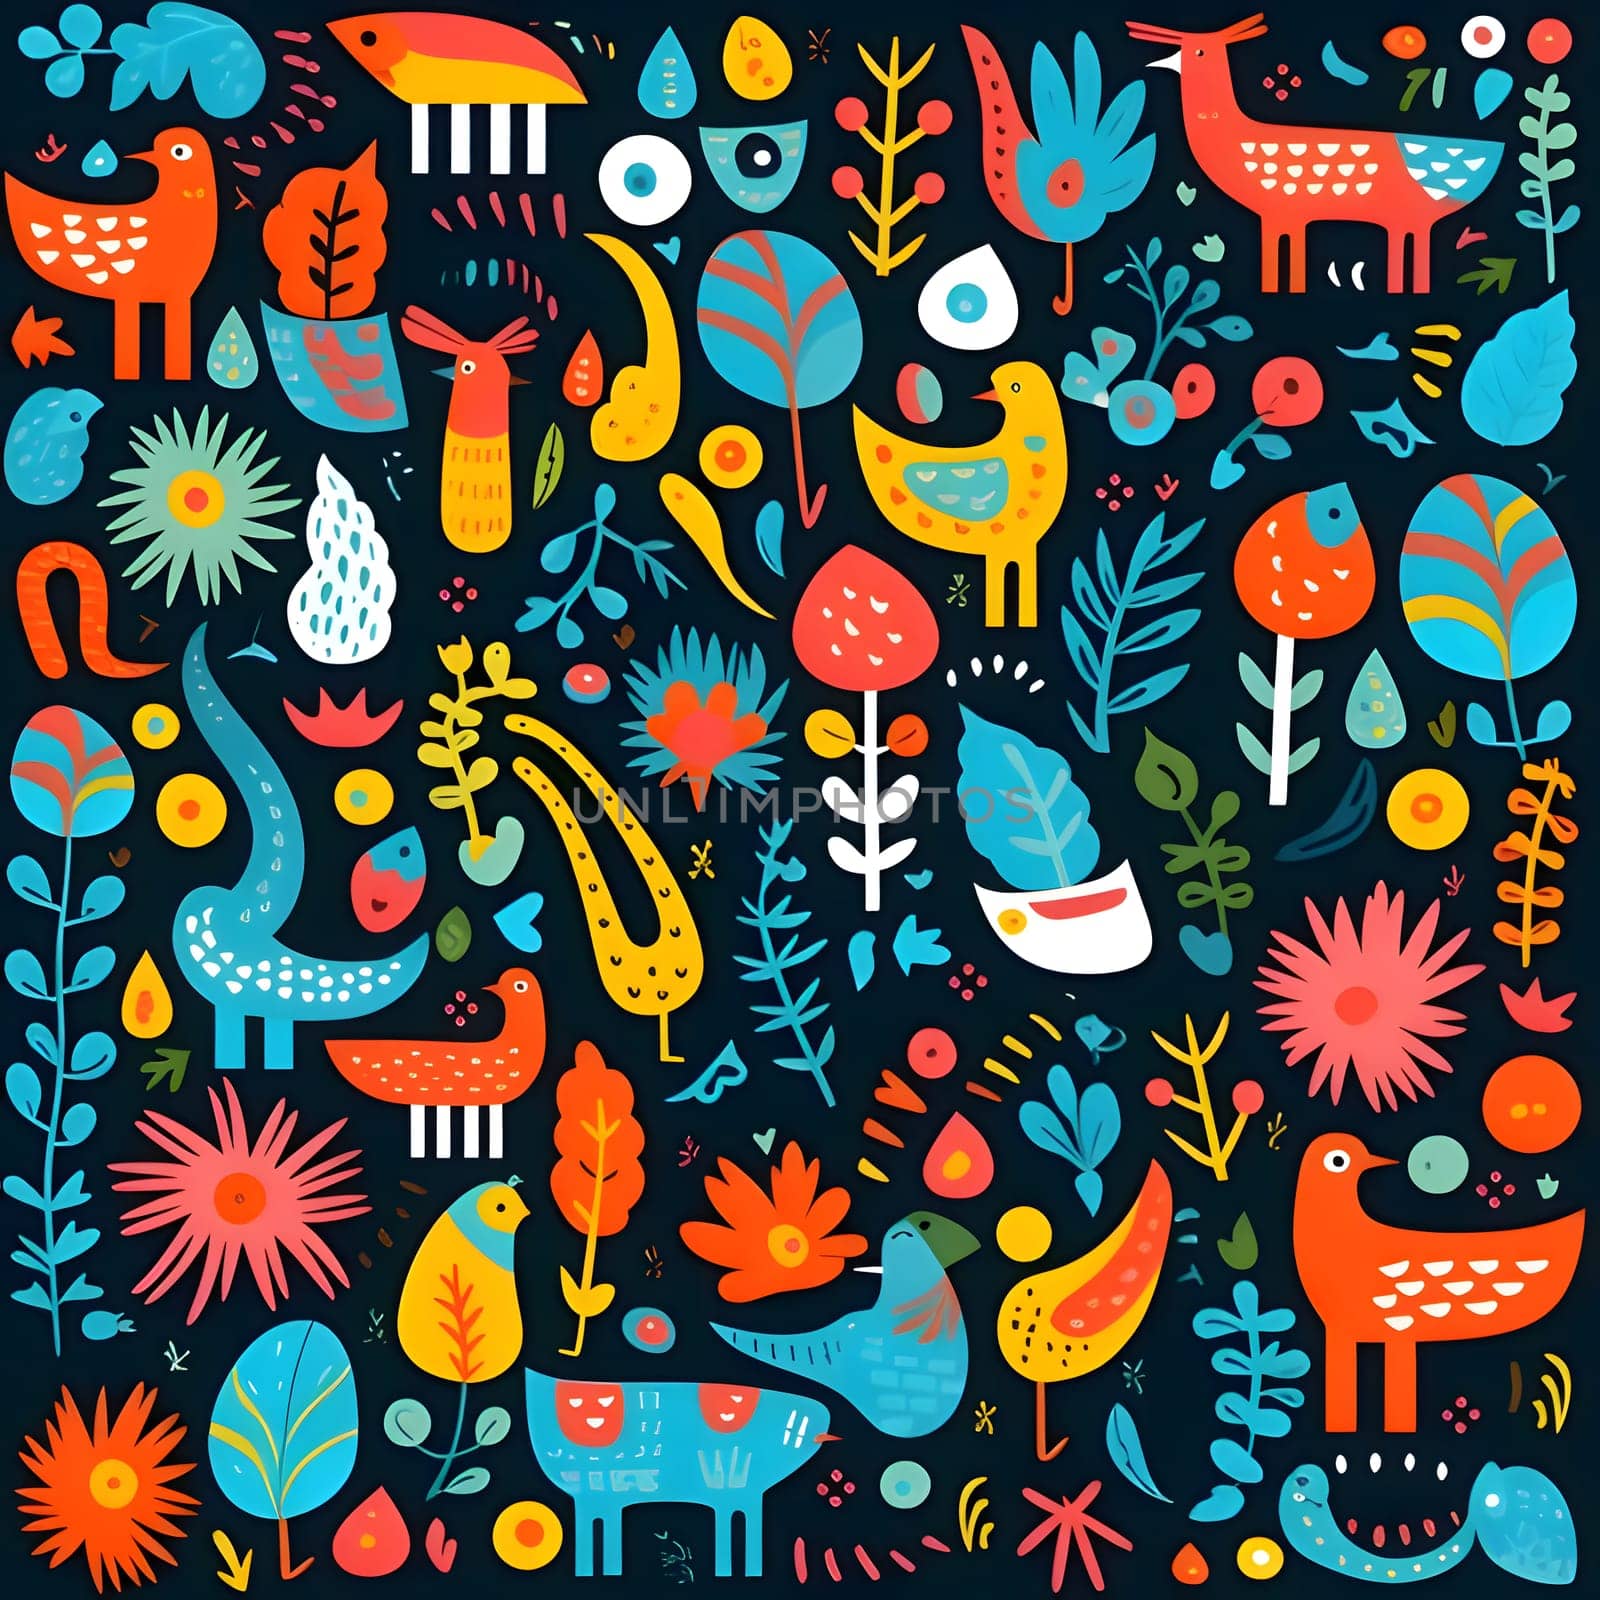 Patterns and banners backgrounds: Seamless pattern with cute cartoon animals and plants. Vector illustration.